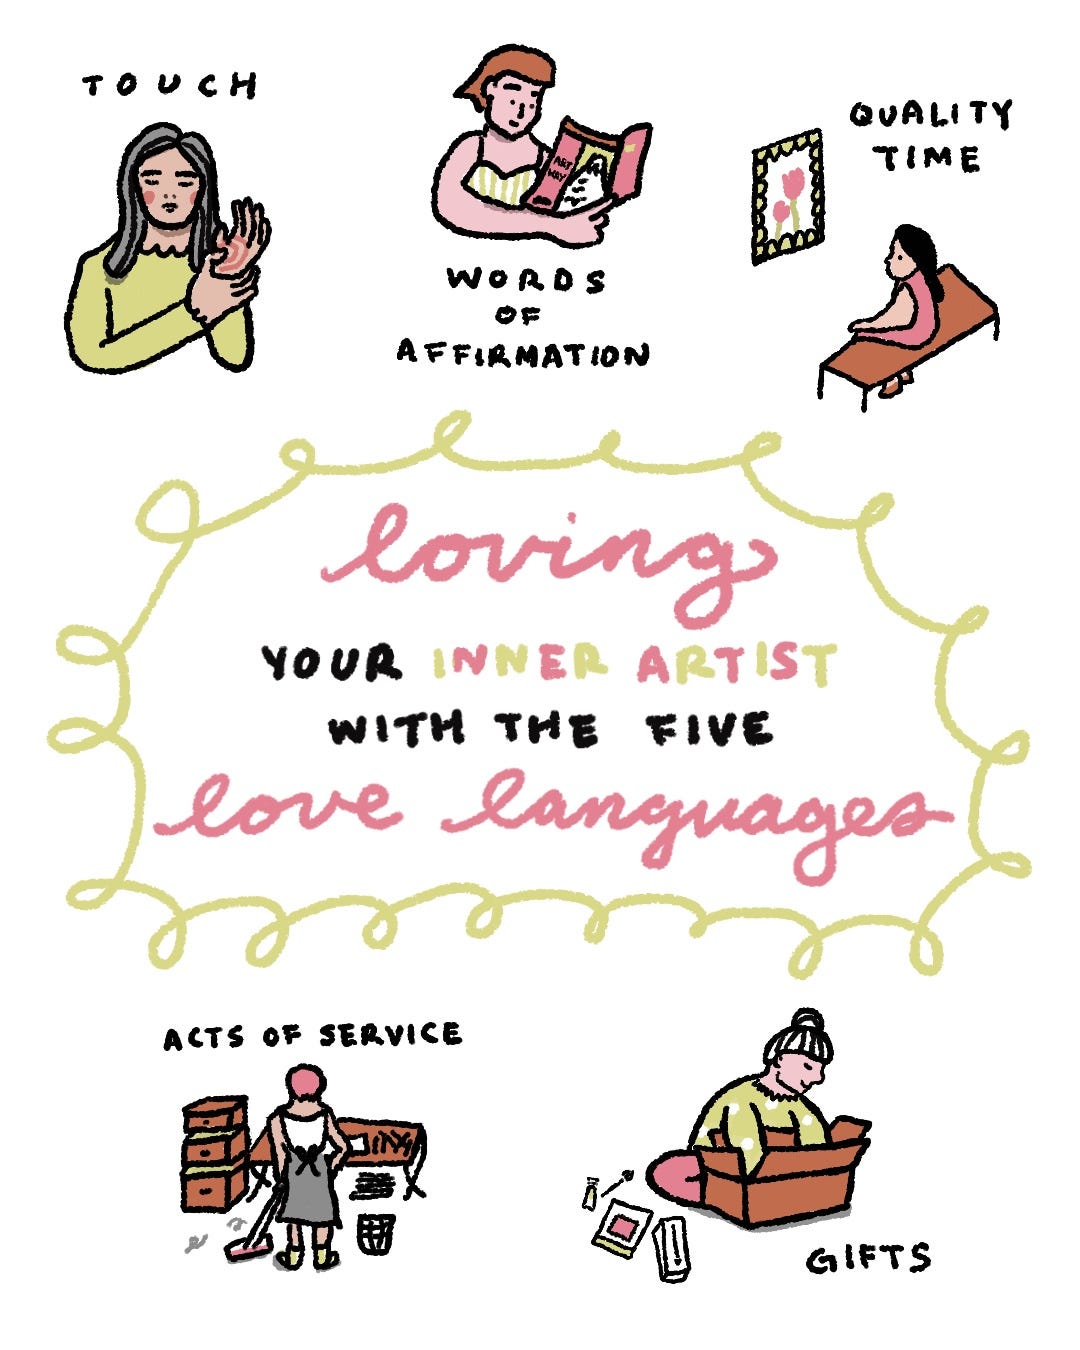 Loving your inner artist with the five love languages